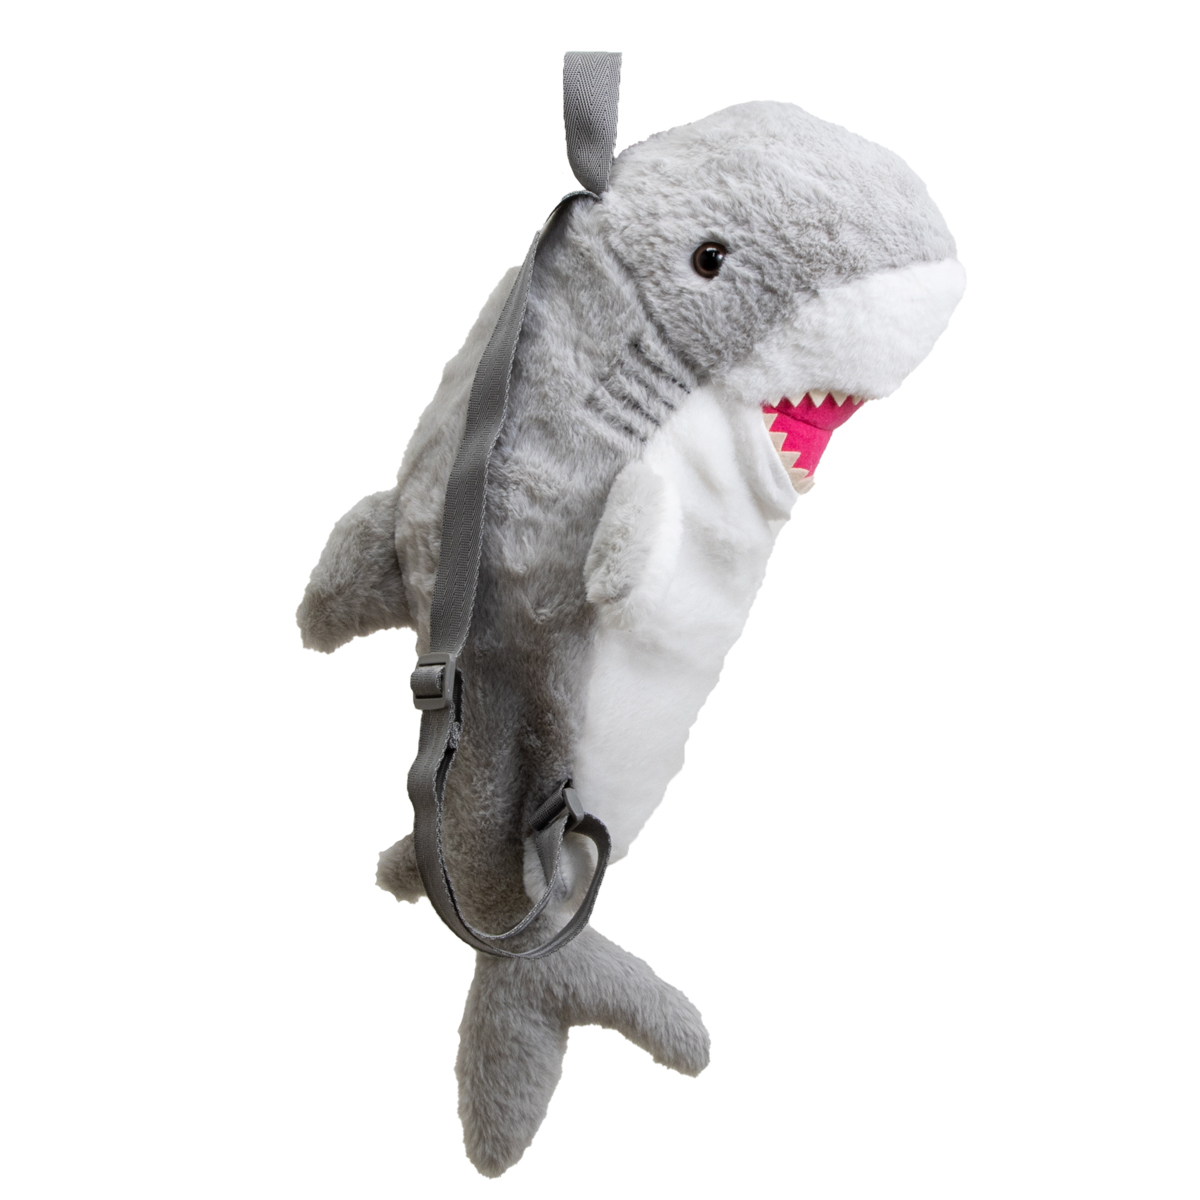 Treasure Cove Plush Shark Backpack 10192WE Kids Stuffed Shark 20-Inch Day Pack with Hidden Pocket for Small Item Treasures Pillo